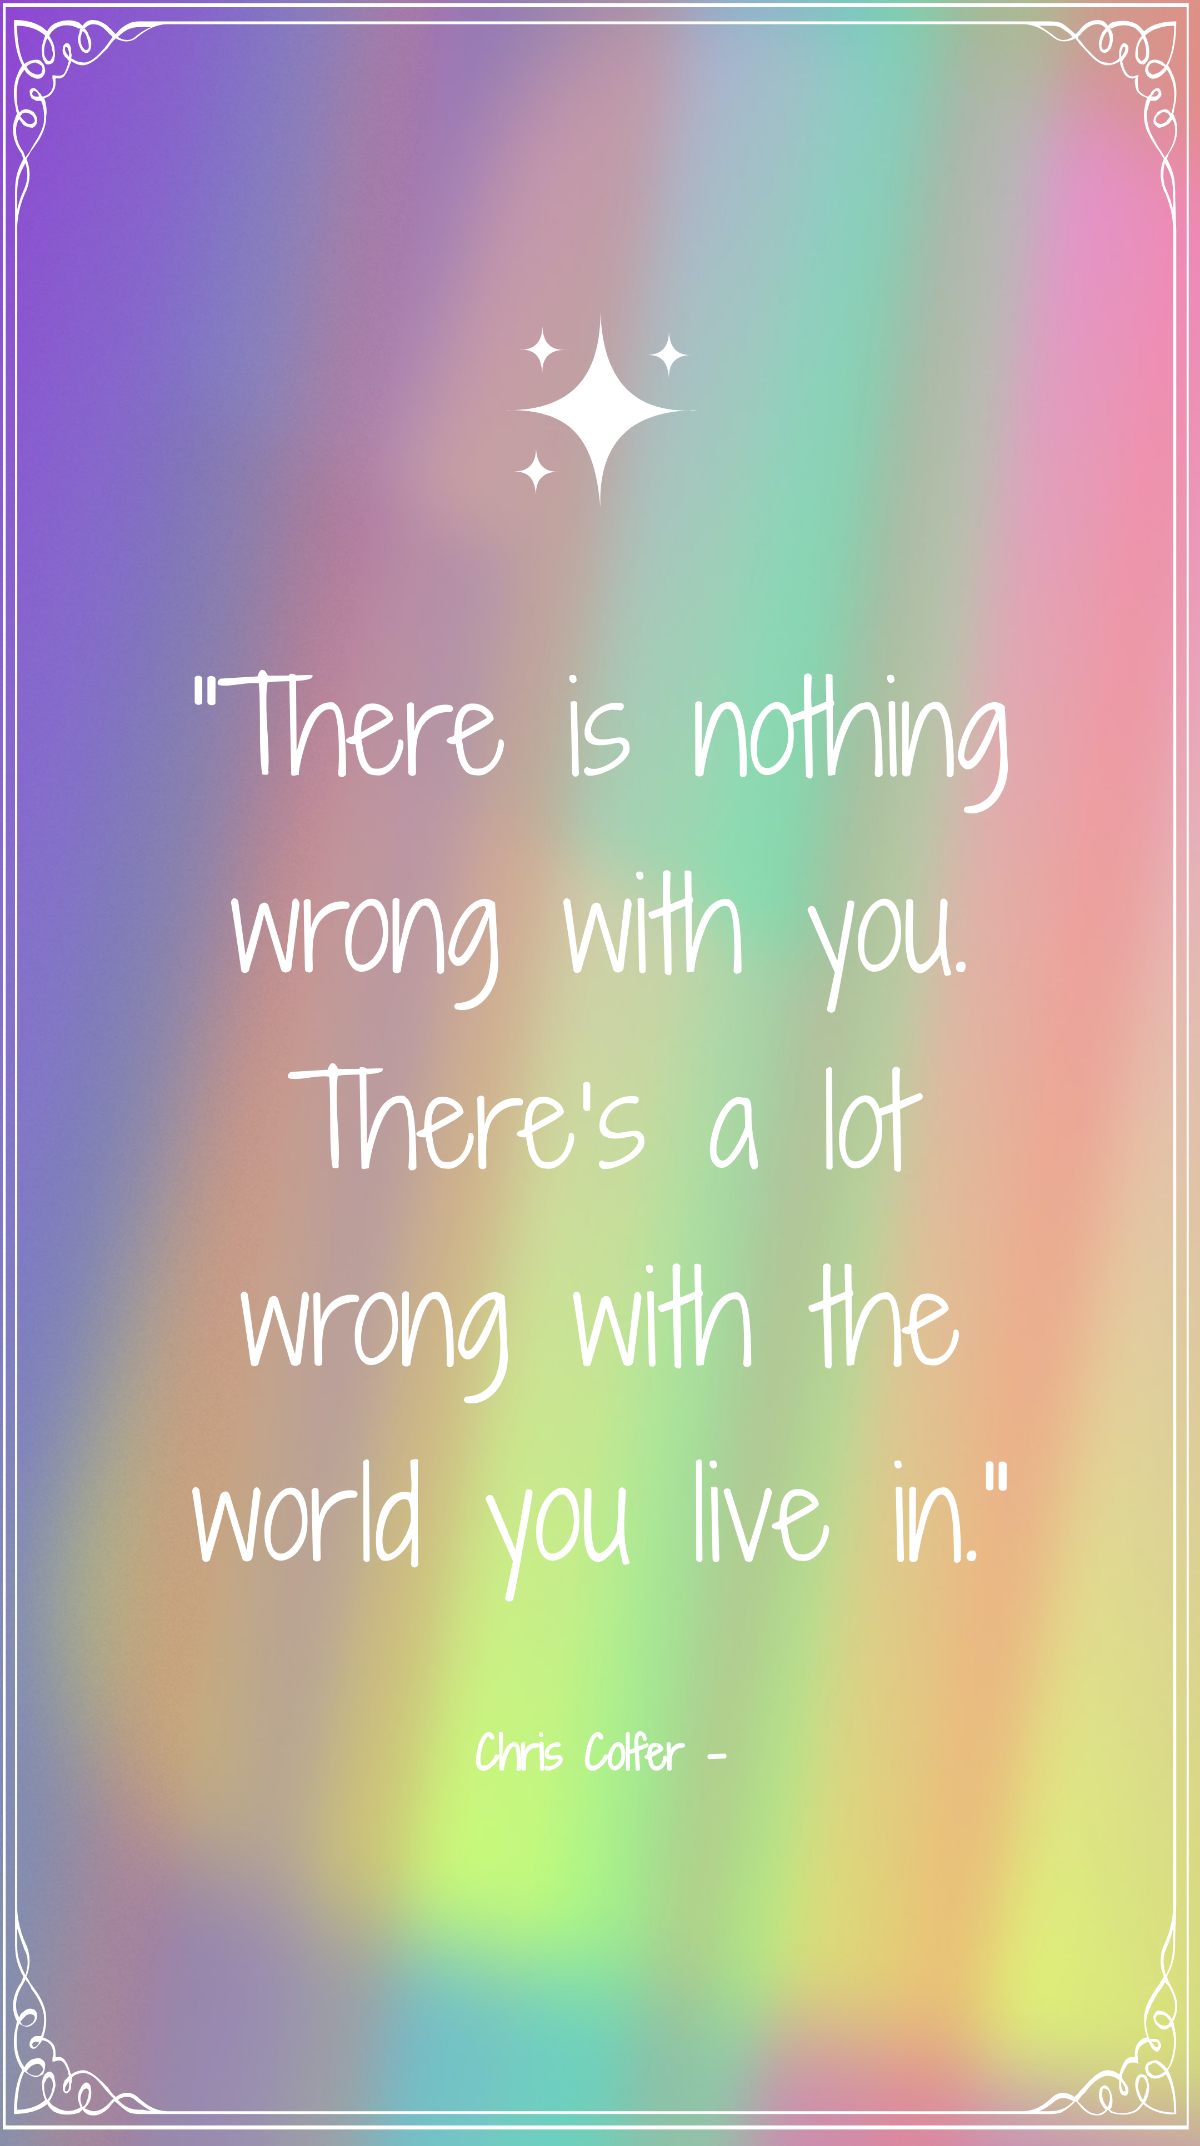 Chris Colfer - There is nothing wrong with you. There’s a lot wrong with the world you live in. Template